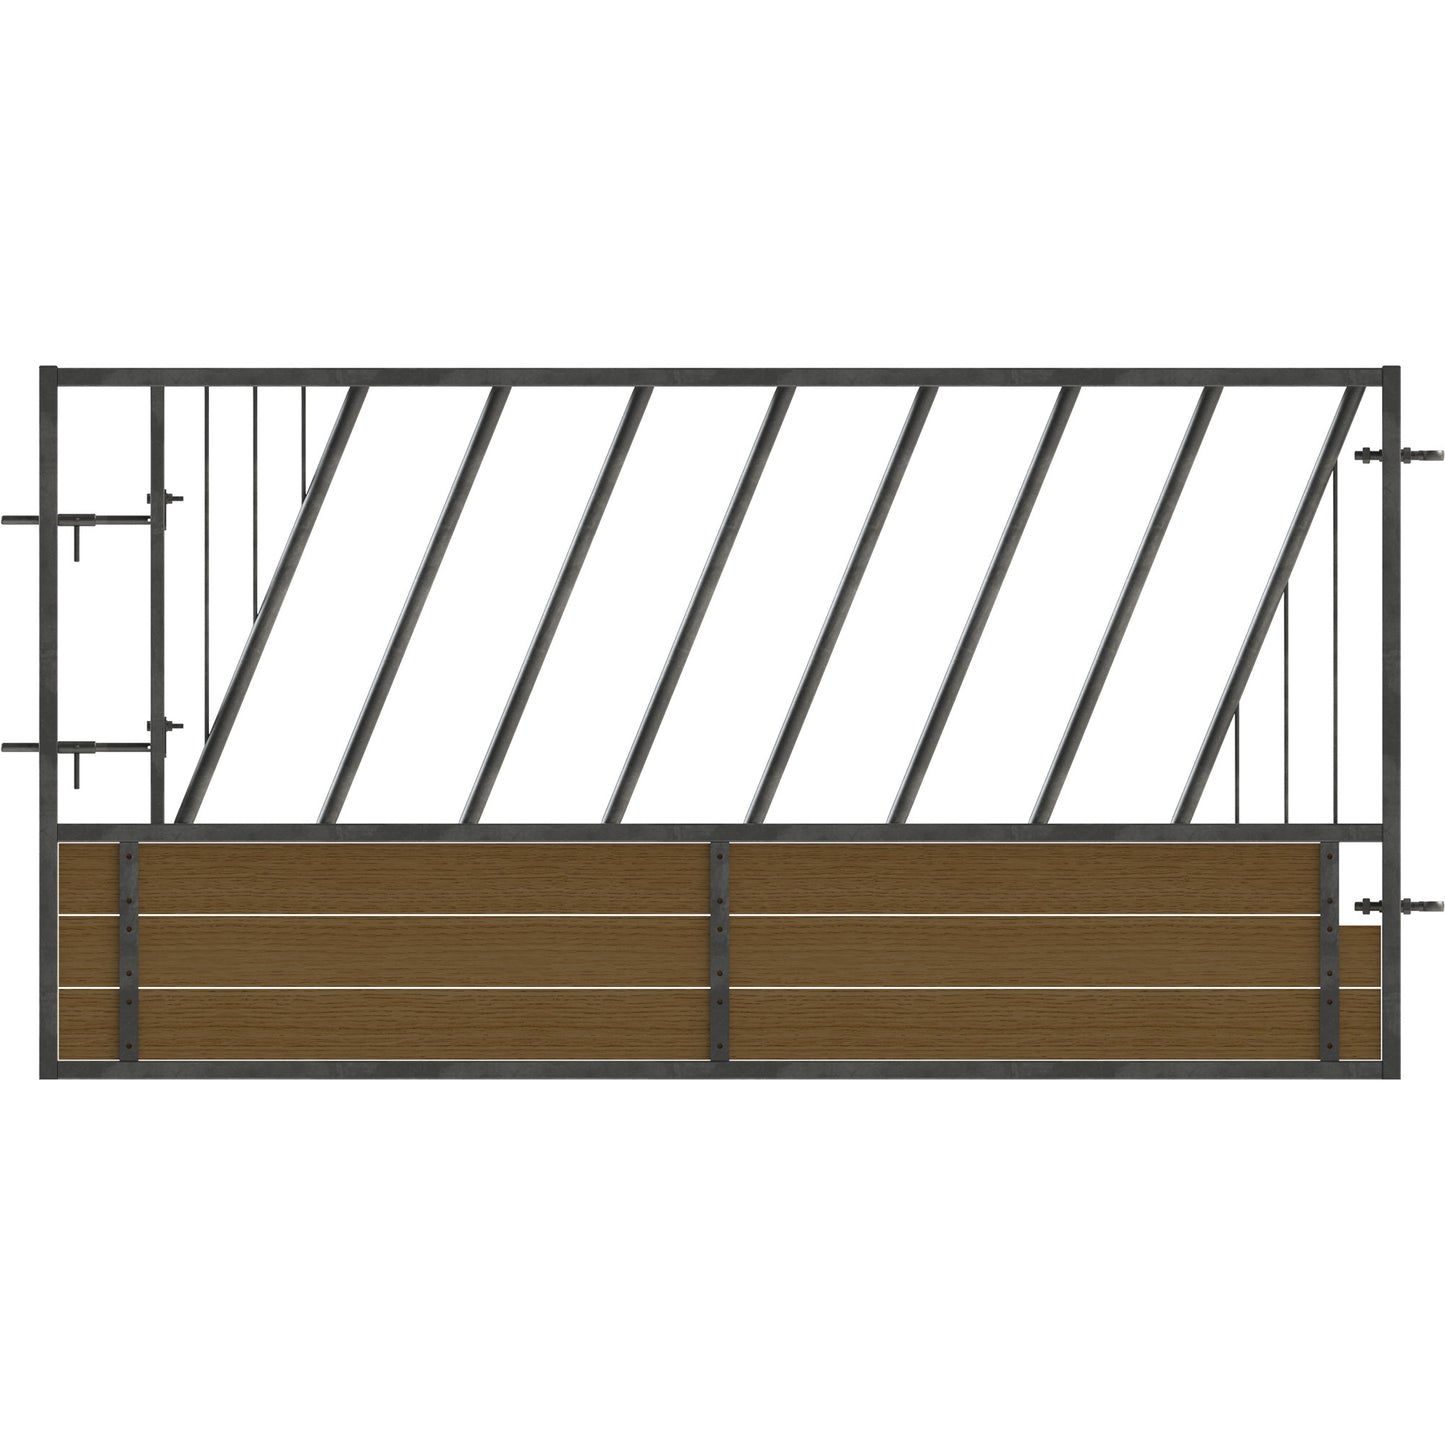 Market Young Stock Diagonal Feed Barrier Gate Unit with Timber Base